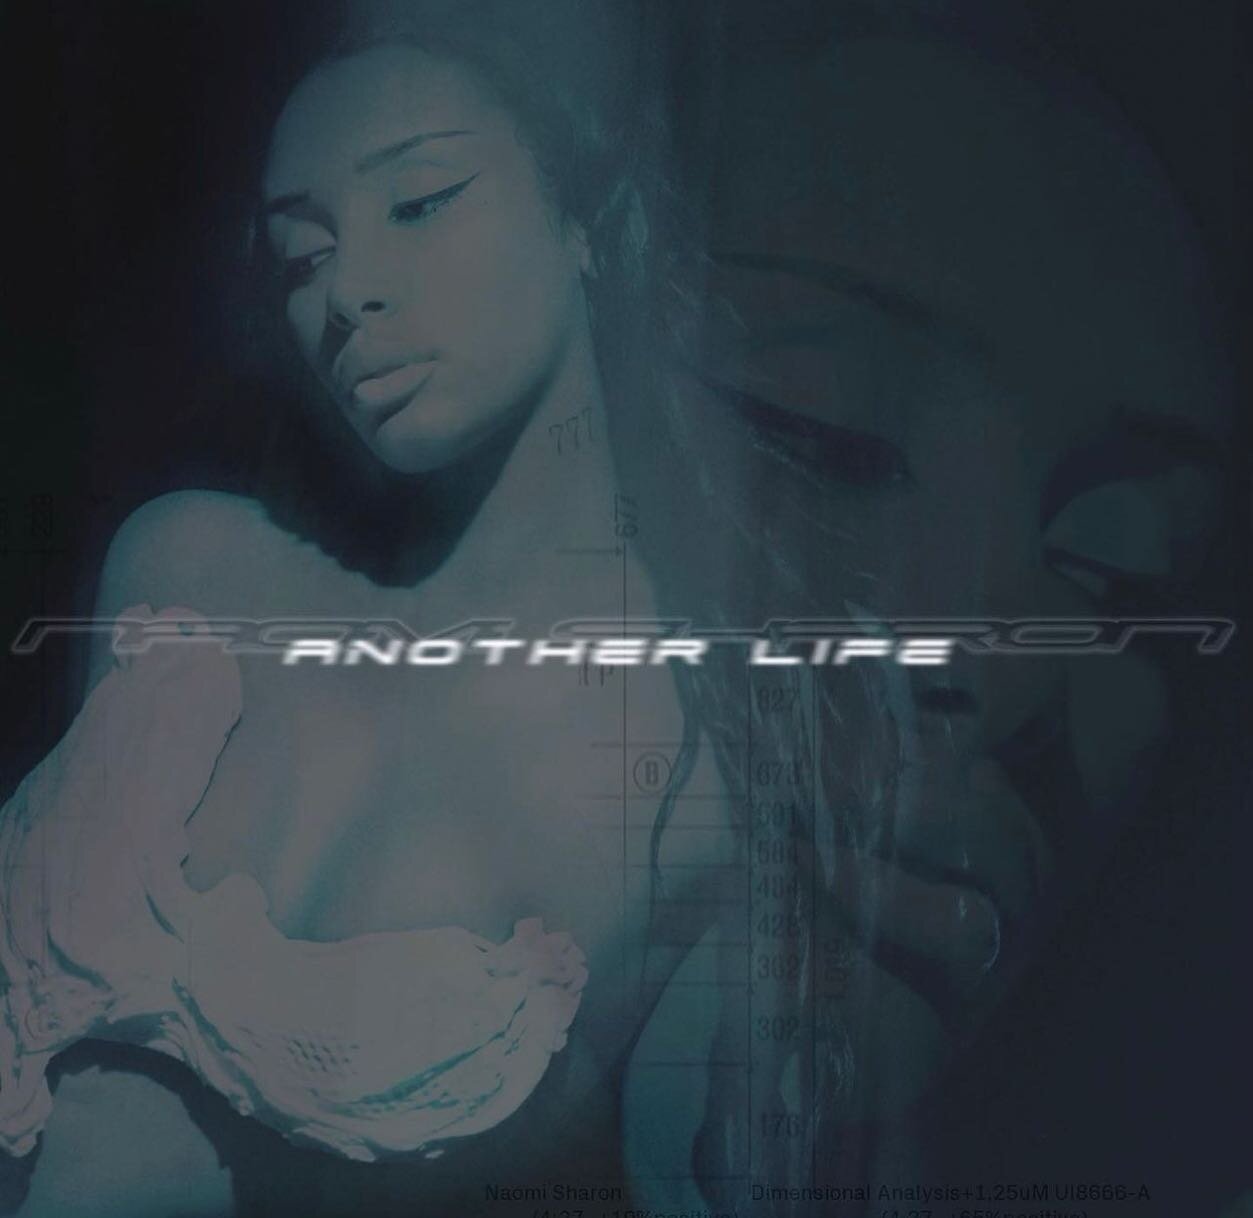 &ldquo;Another Life&rdquo; by @naomisharon for @ovosound. Co-mixed by @ovo40 and @alextumay. Spatial mix by @dyregormsen. Listen now.